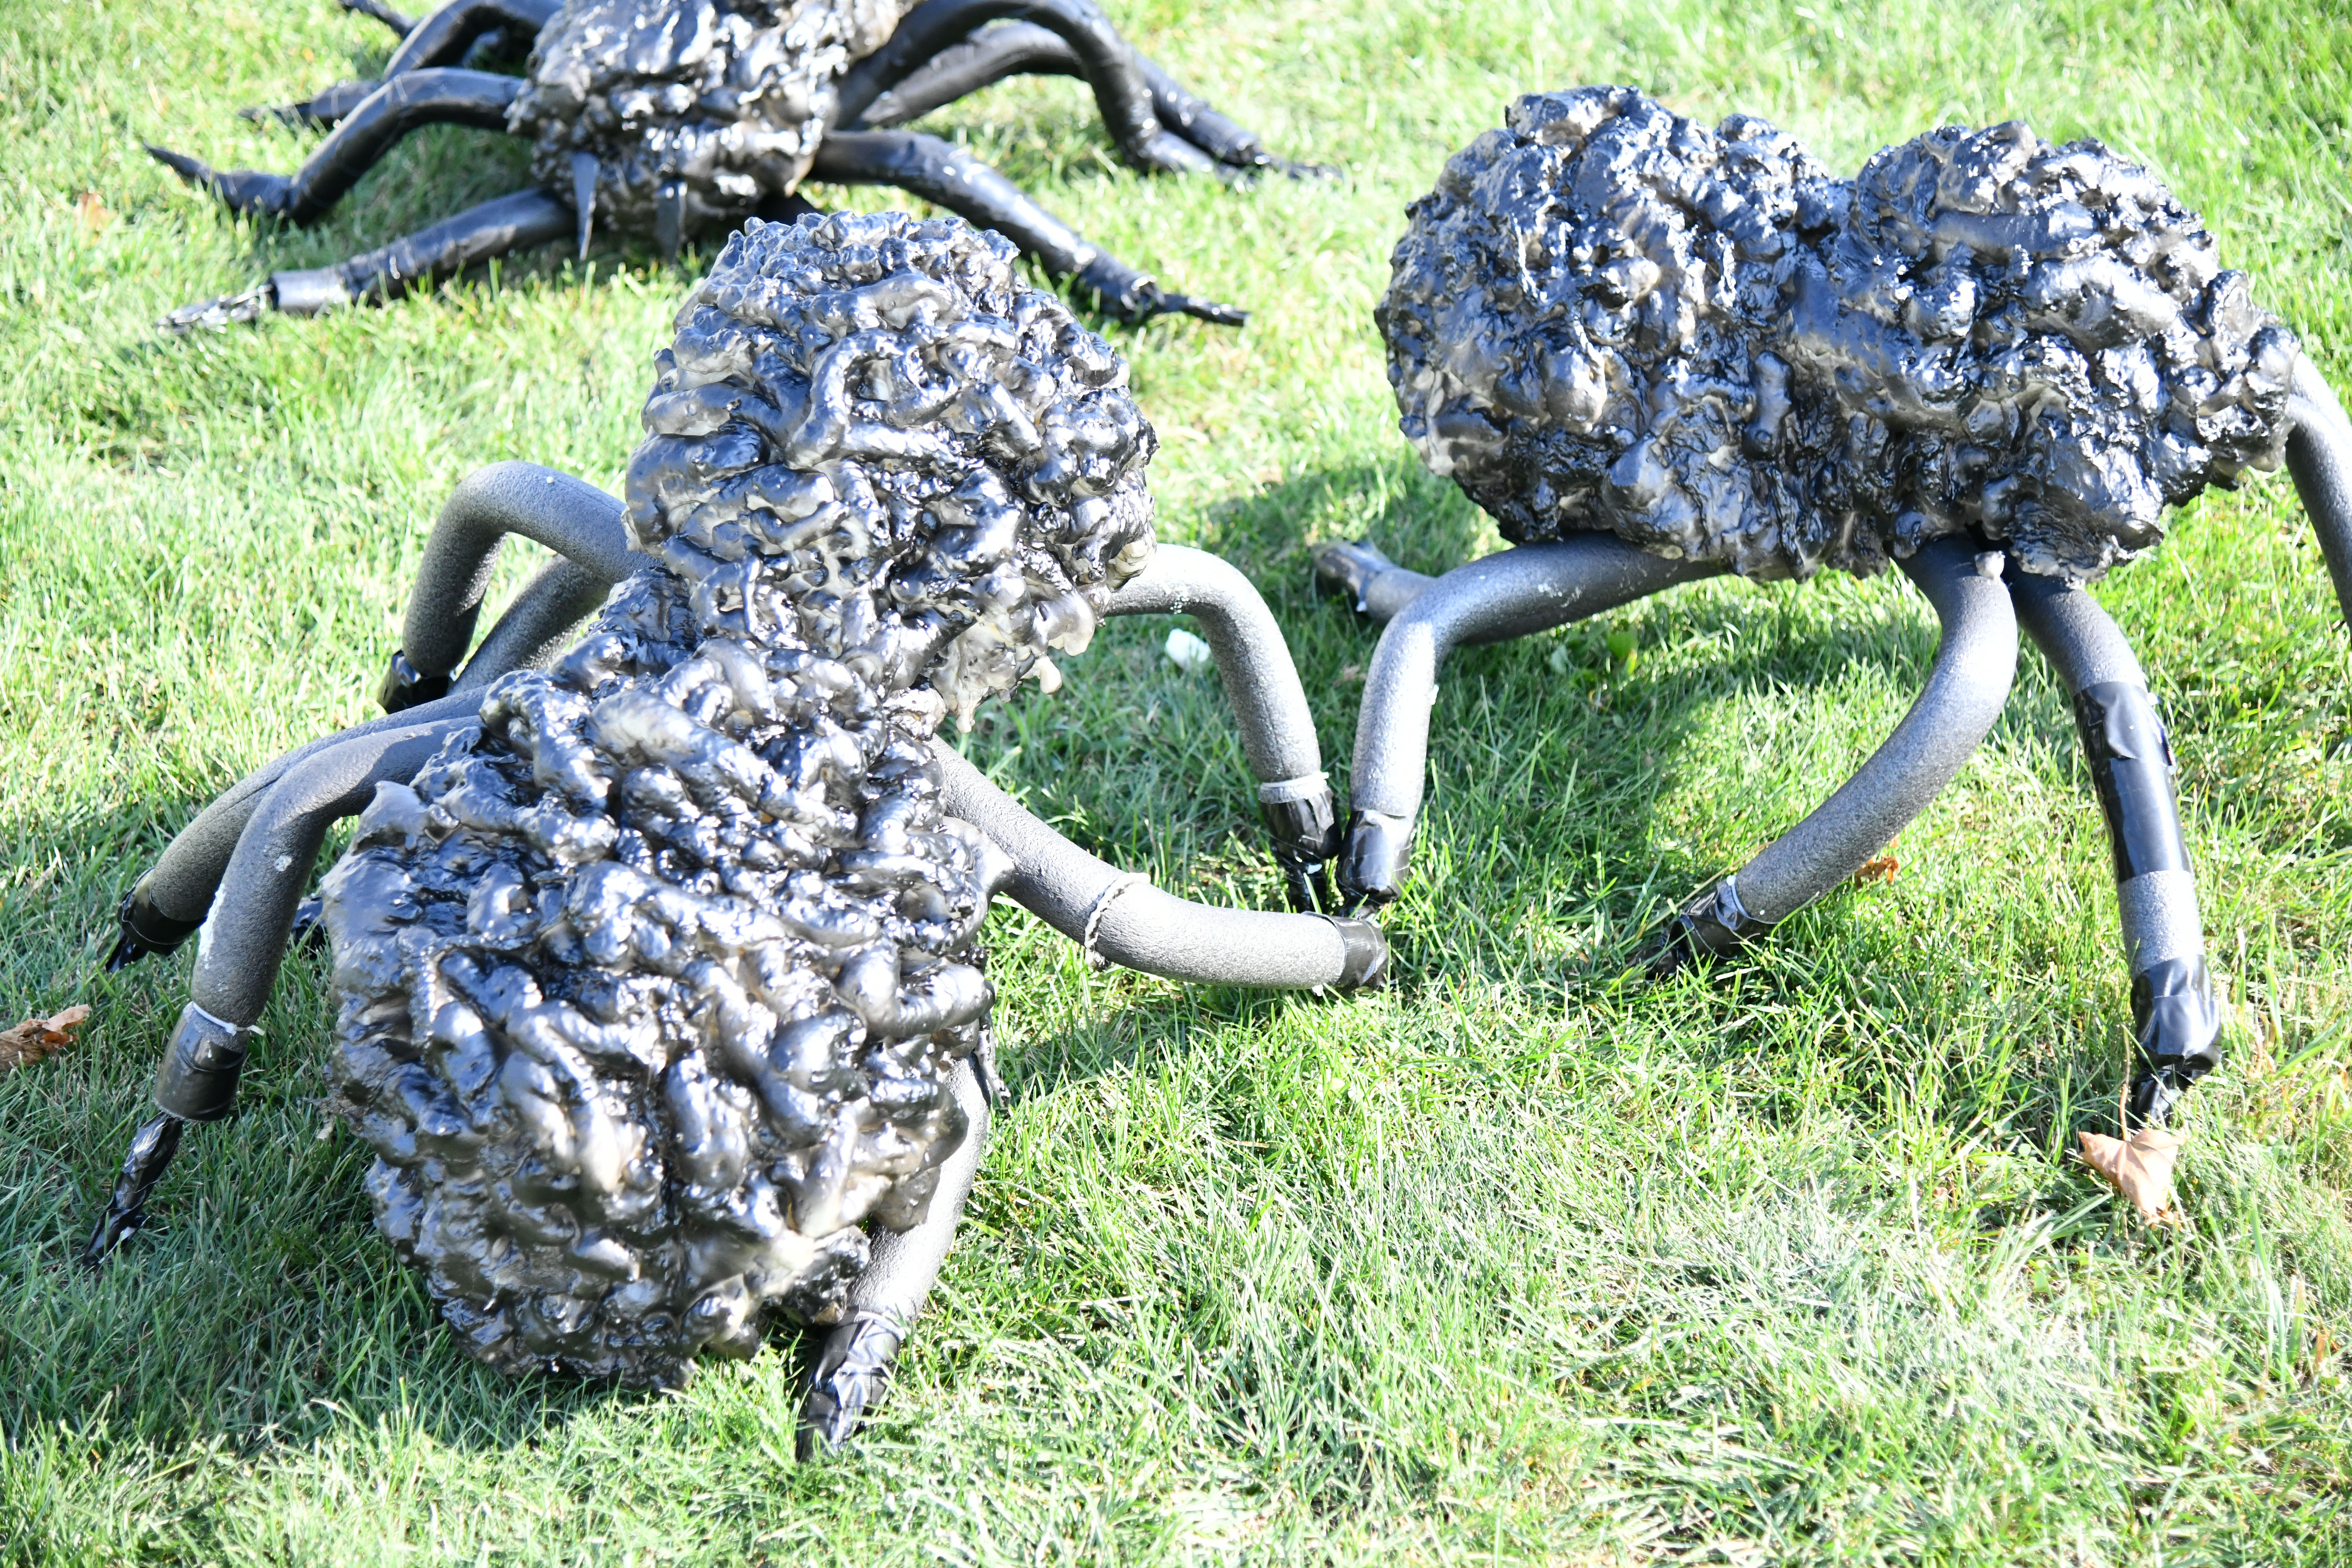 DIY Halloween Spider forms standing on grass spray painted all black